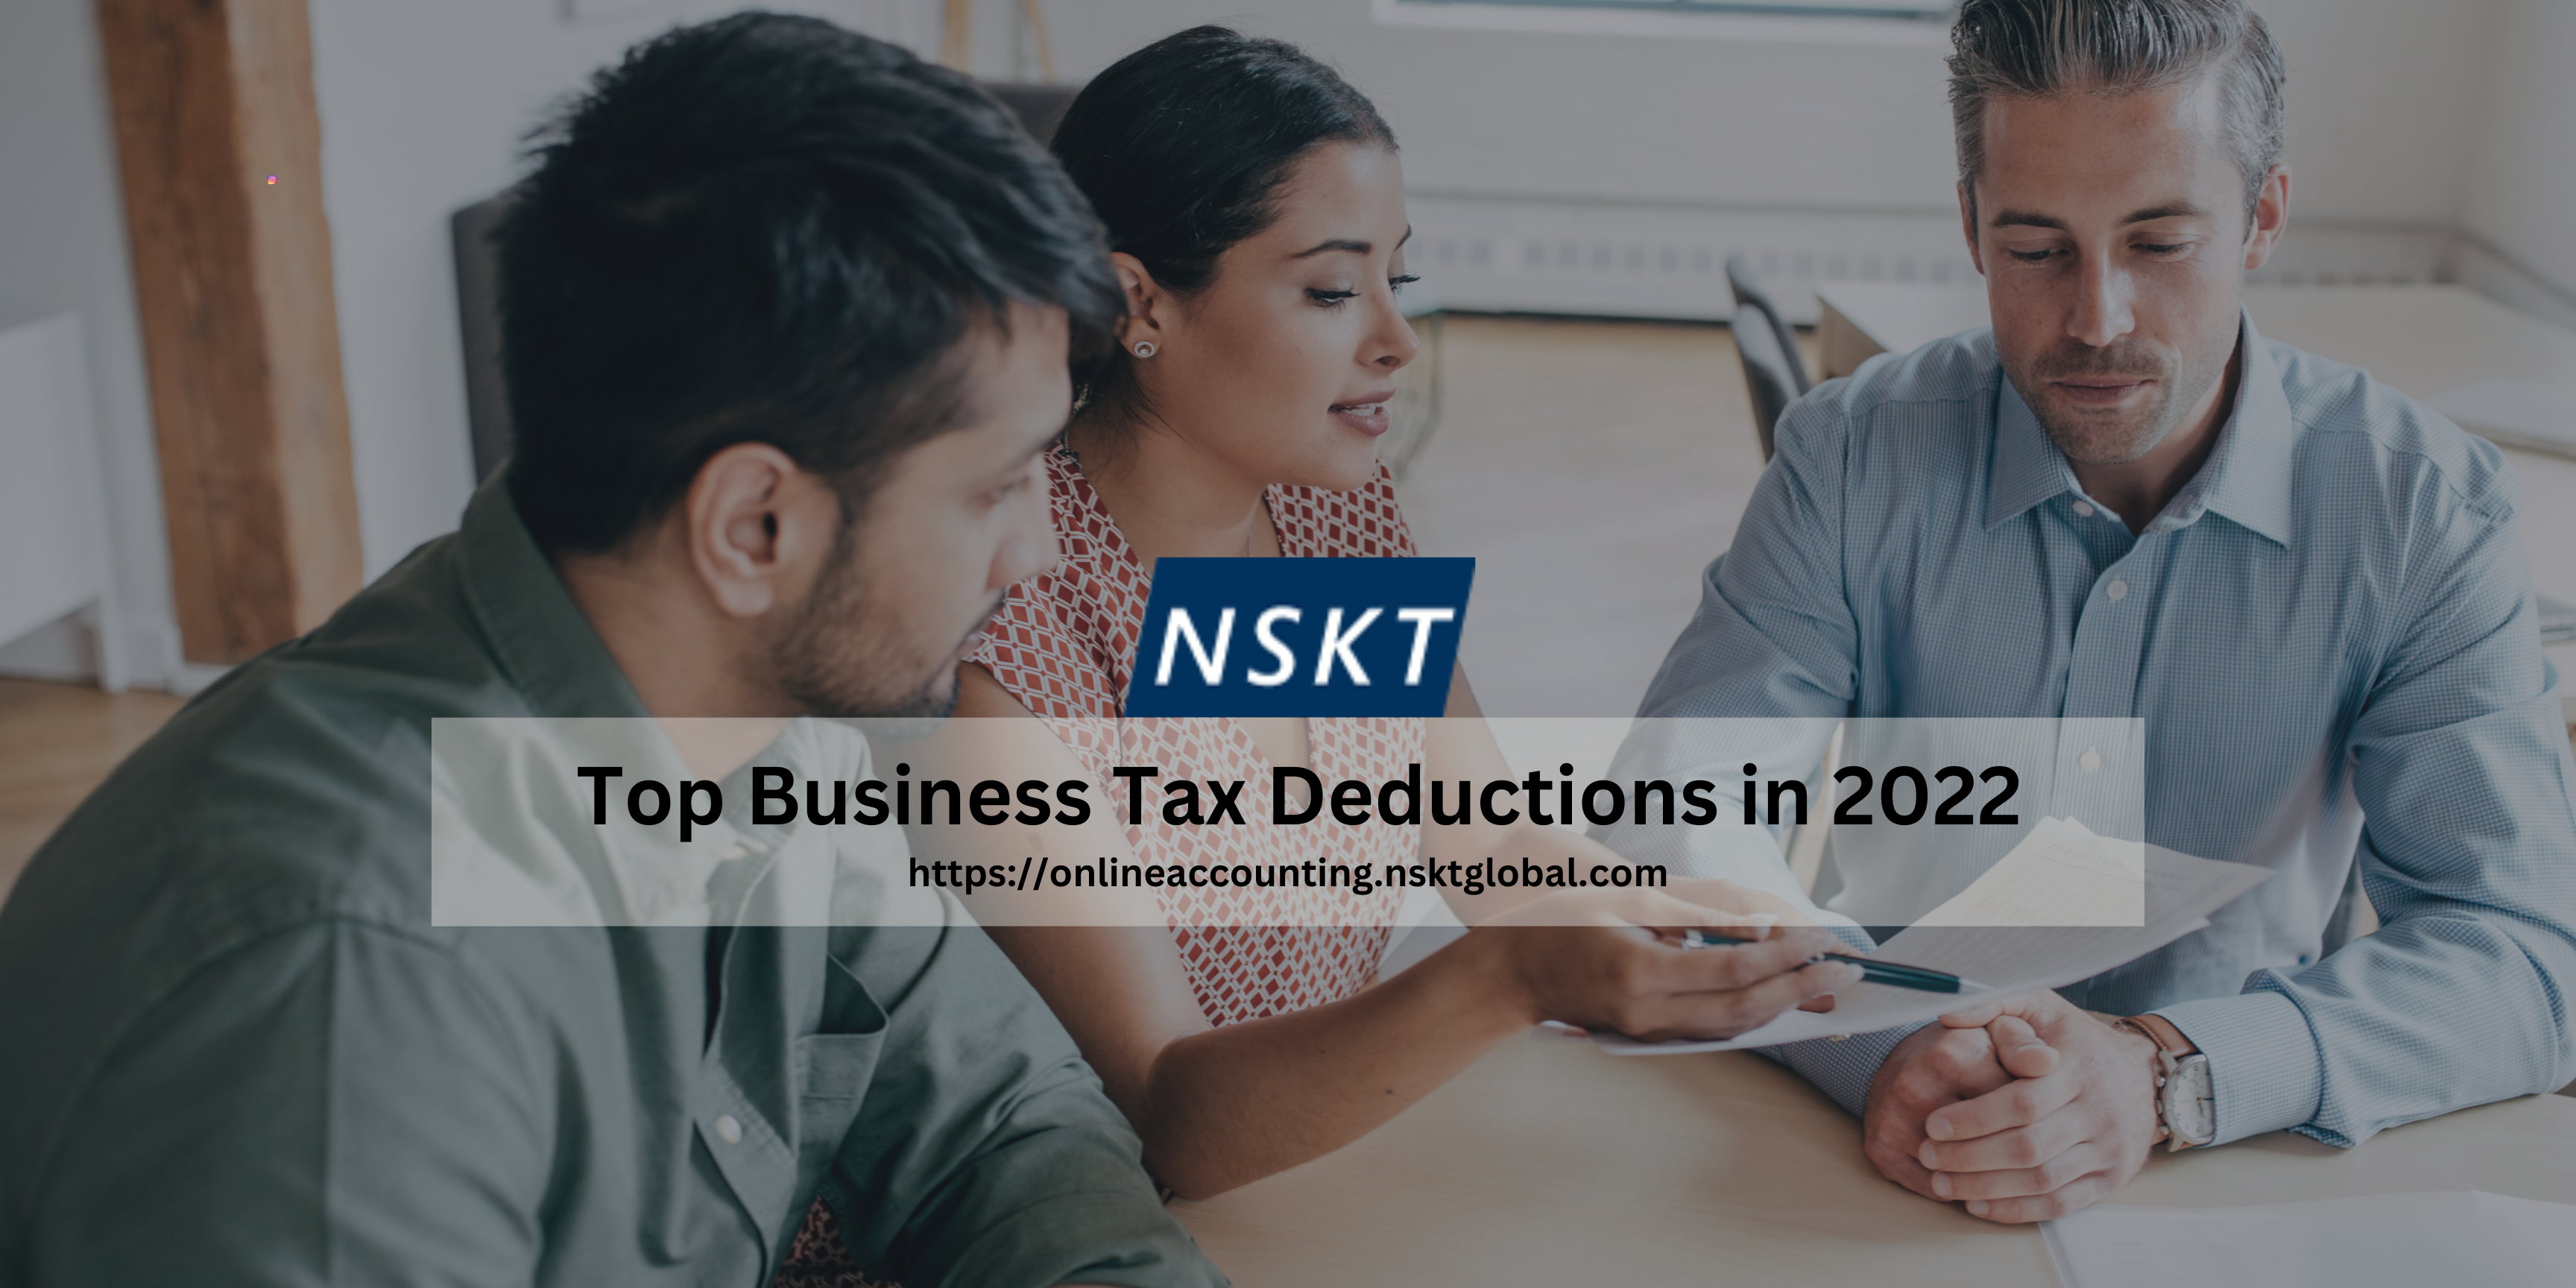 Top Business Tax Deductions in 2022